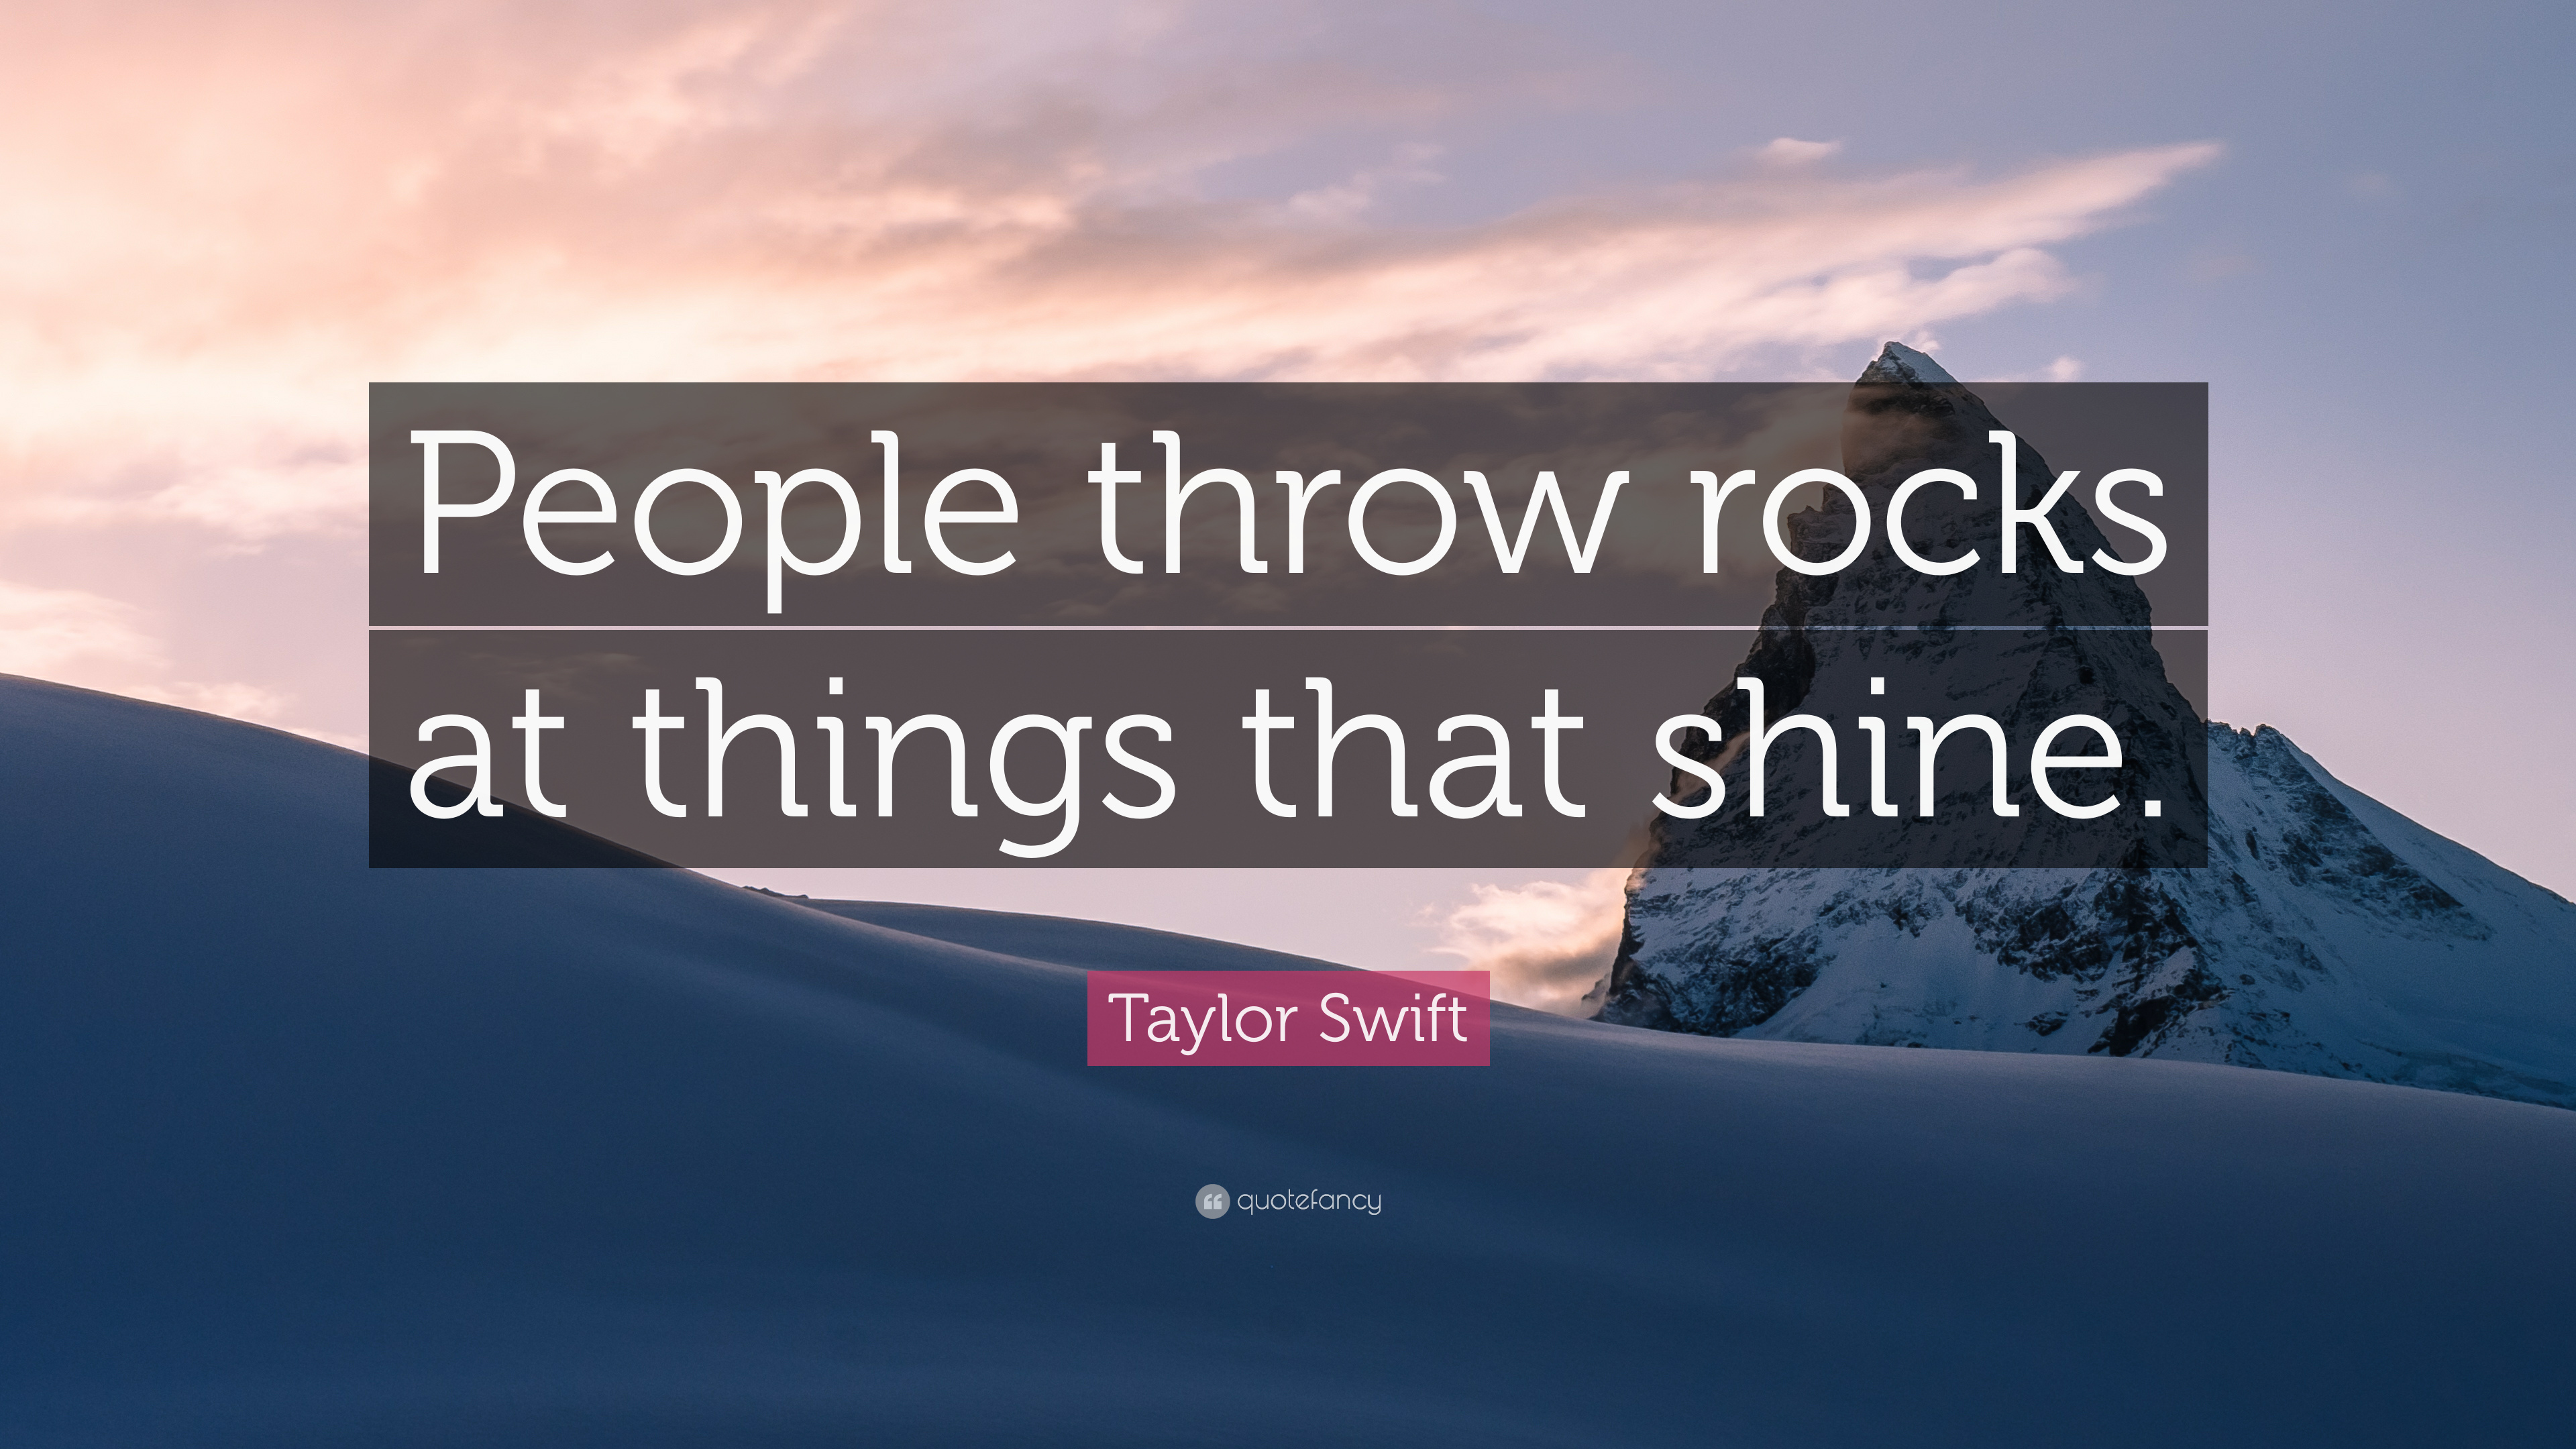 Taylor Swift Quote: “People throw rocks at things that shine